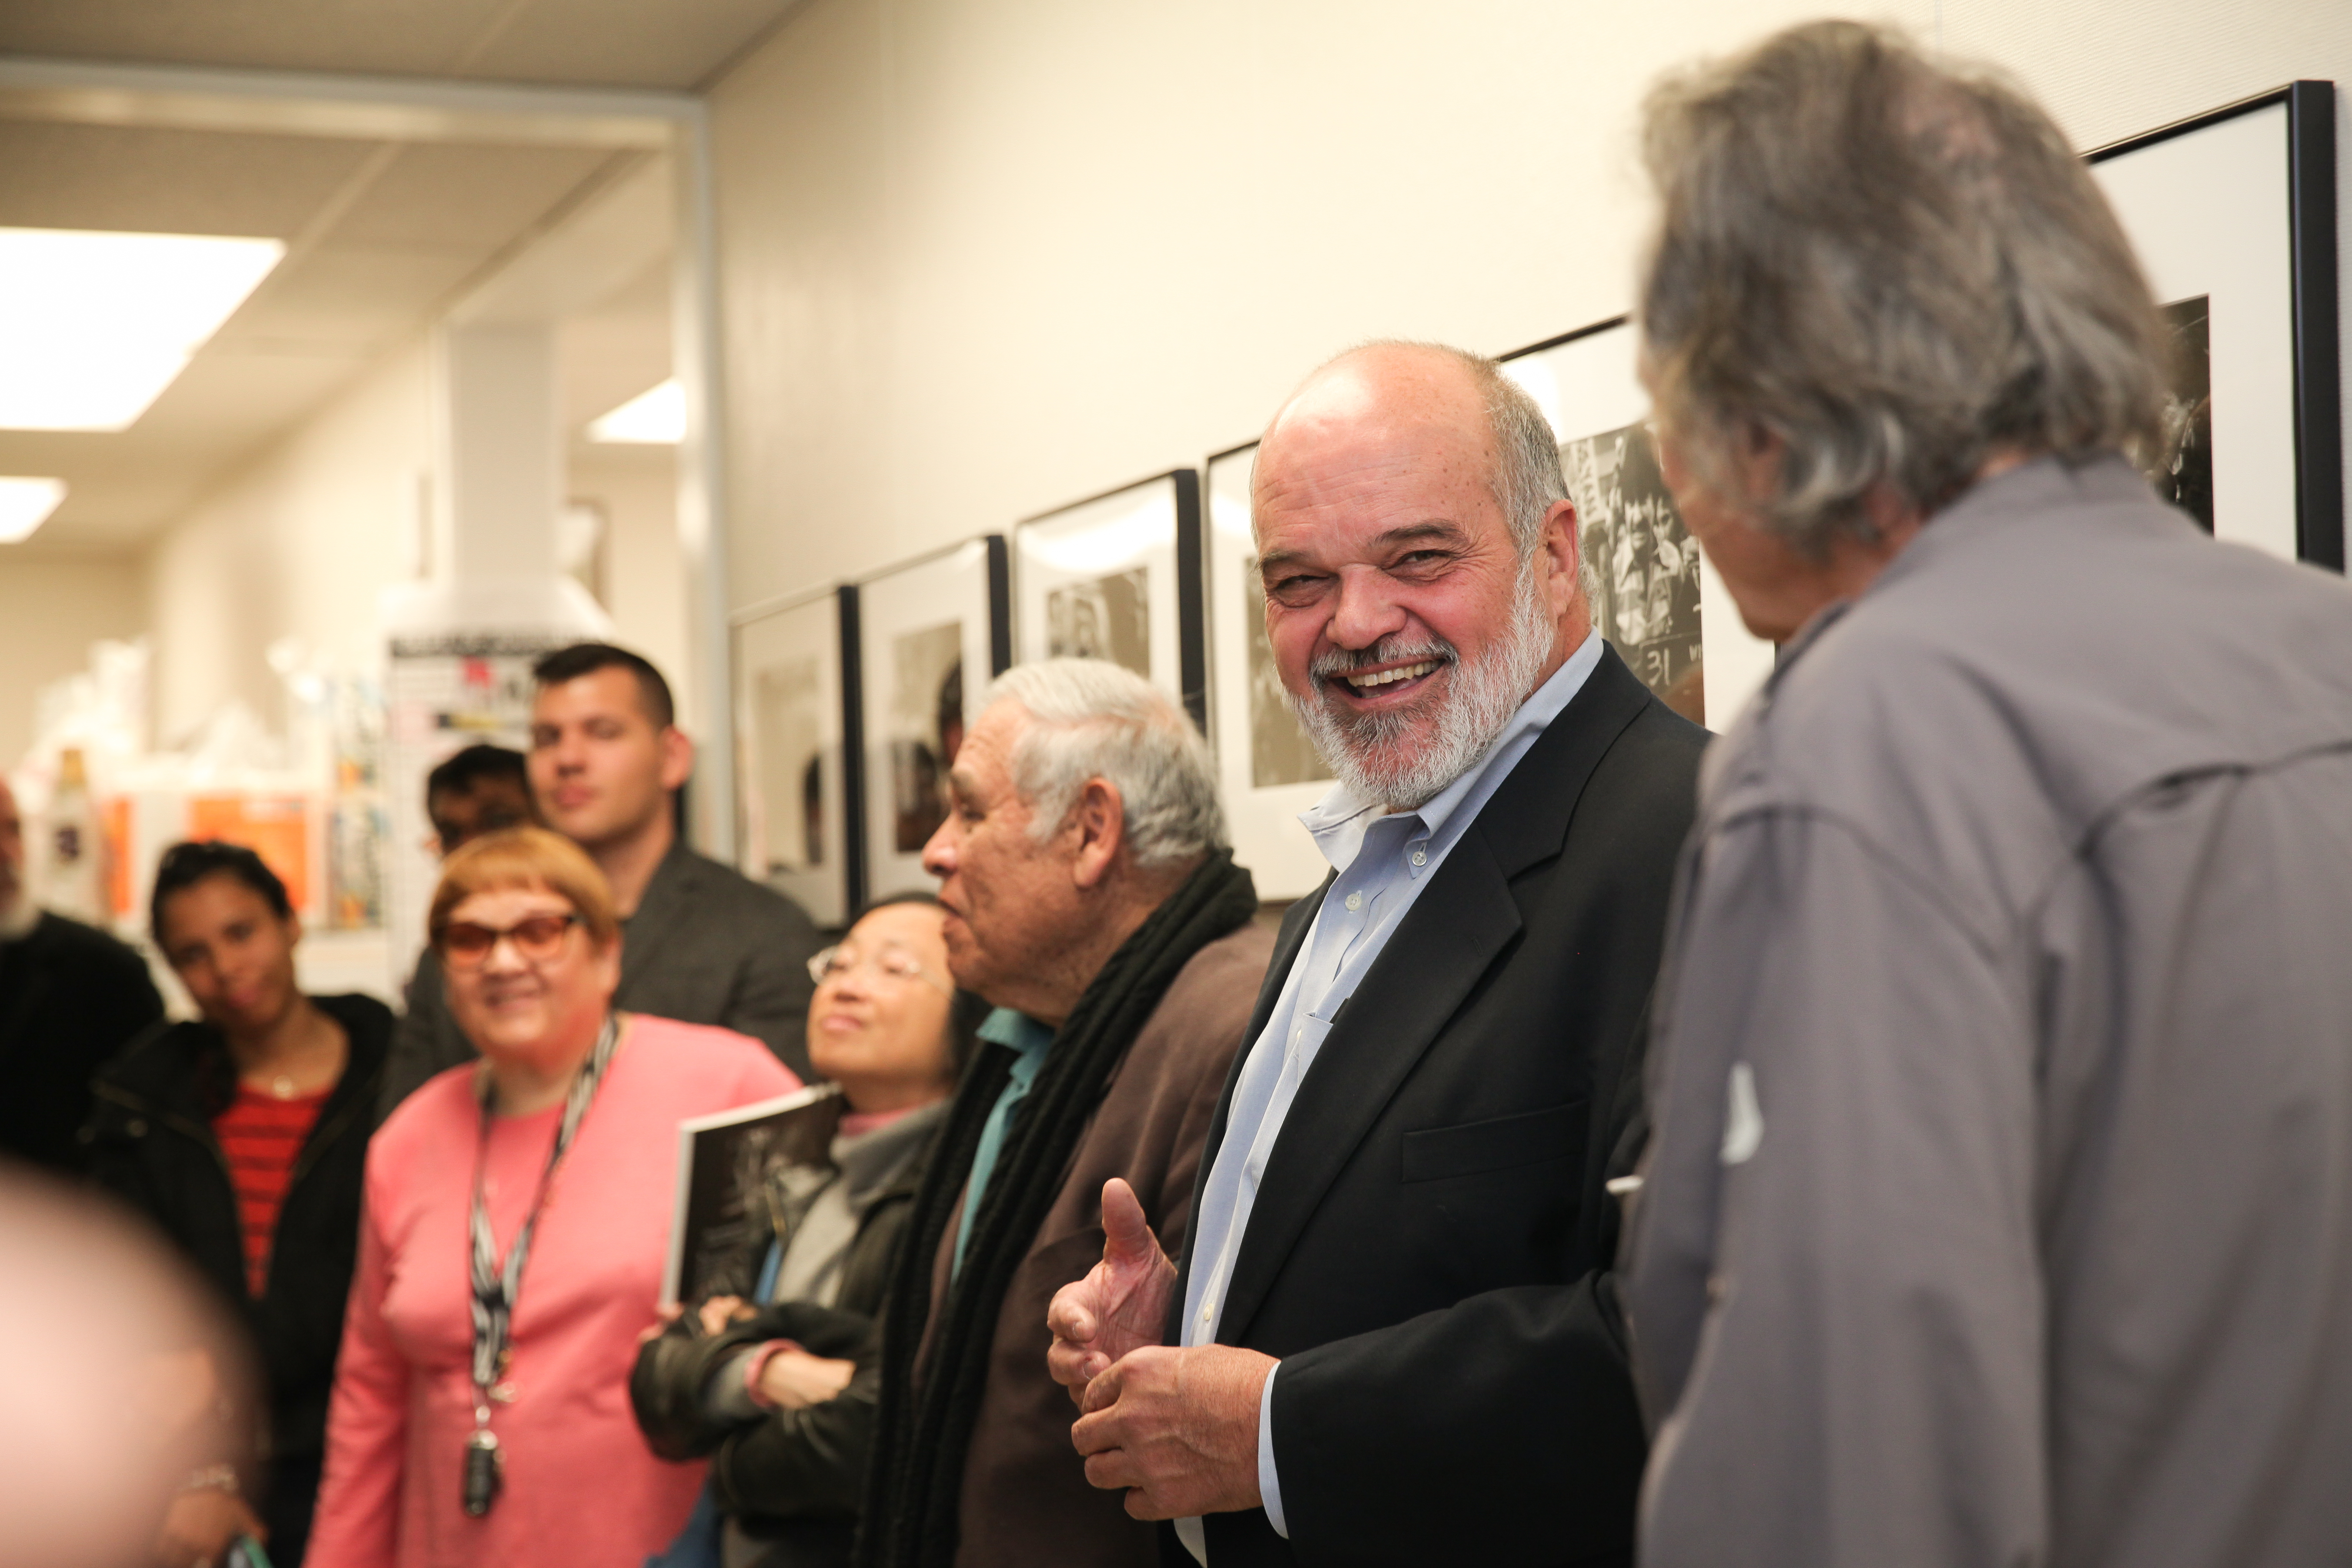 (L-R) Department Chair of Journalism department Juan Gonzales, and two featured artists; Pulitzer Prize-winning photojournalist Kim Komenich and former Reuters Photo Bureau Chief Lou Dematteis give a speech during the opening reception of “In the Line of Fire” a photo exhibition featuring rare war zone photographs at Front Page Gallery in City College of San Francisco Department of Journalism on Friday, April 13, 2018 in San Francisco, Calif. (Photo by Ekevara Kitpowsong)